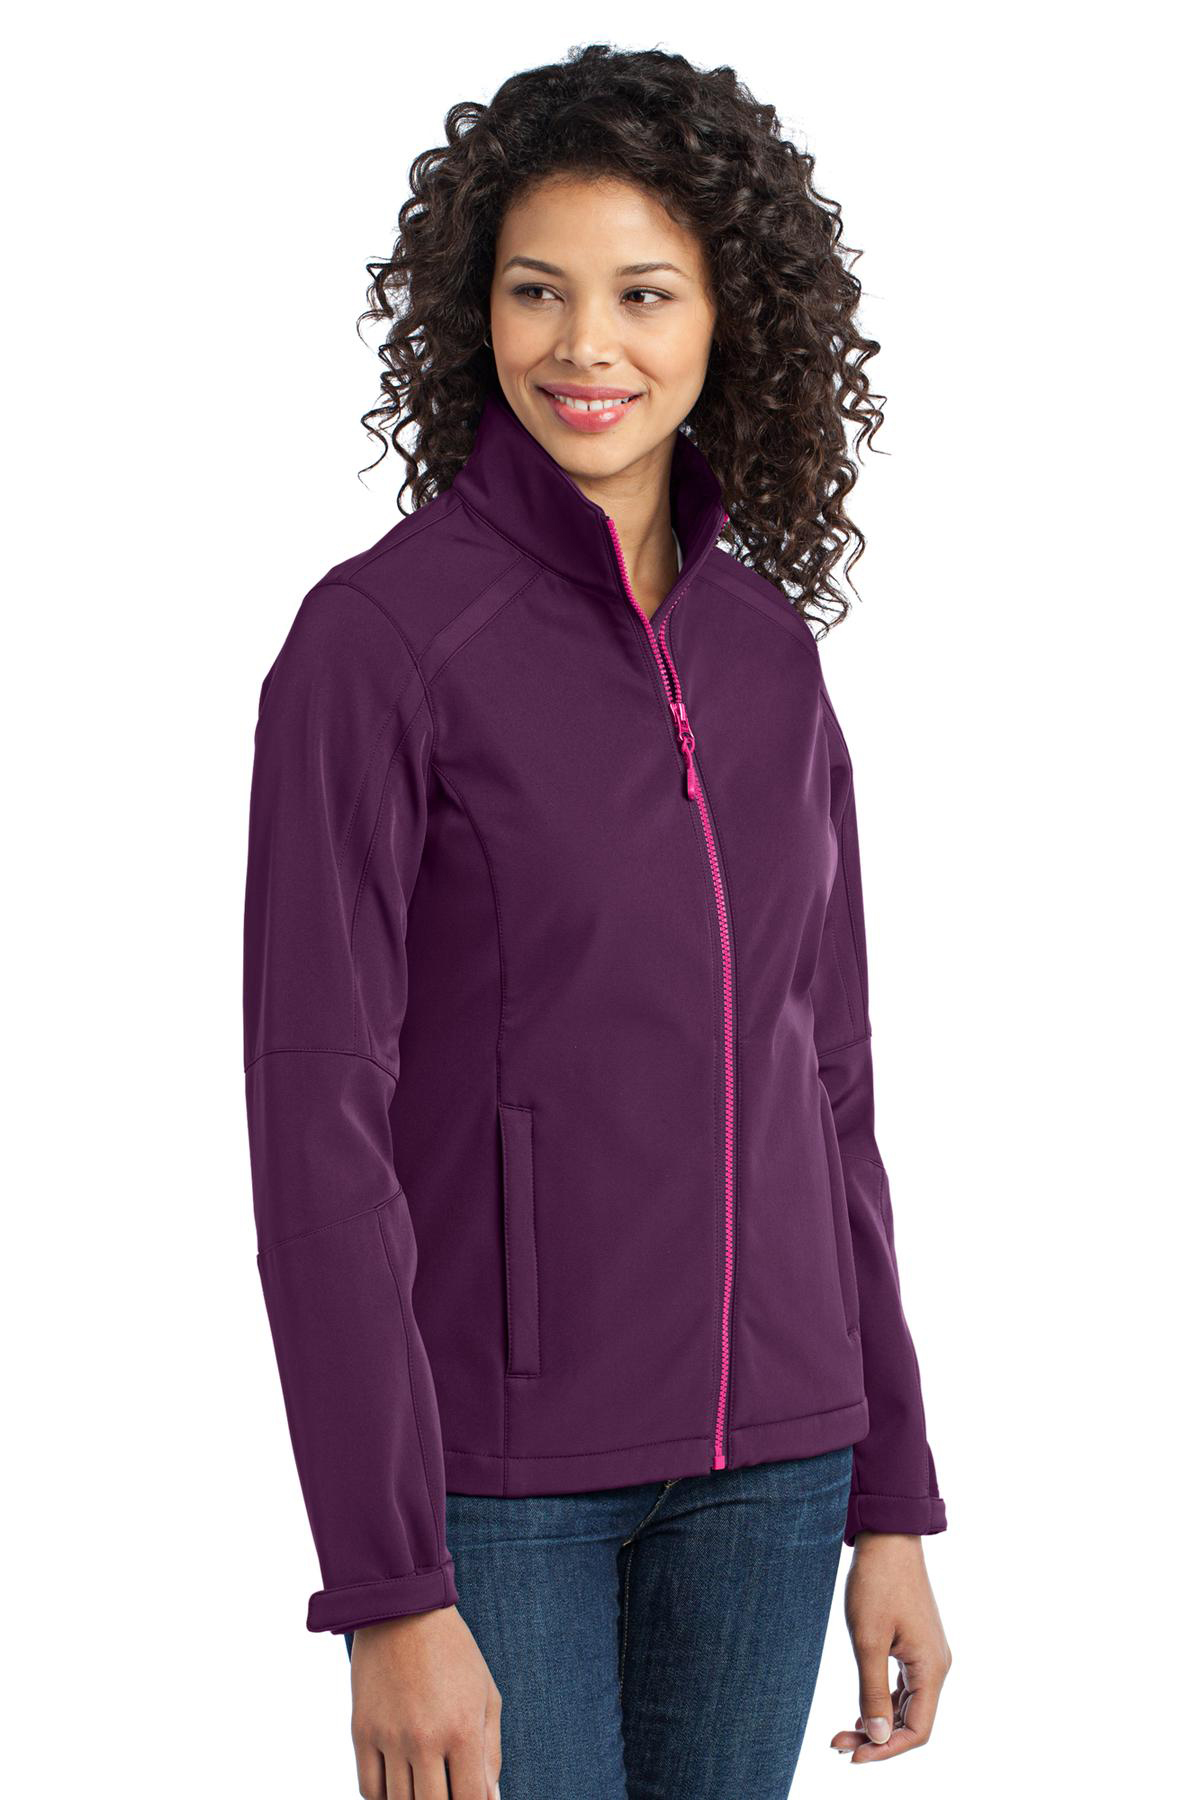 CLOSEOUT Port Authority Ladies Traverse Soft Shell Jacket | Product ...